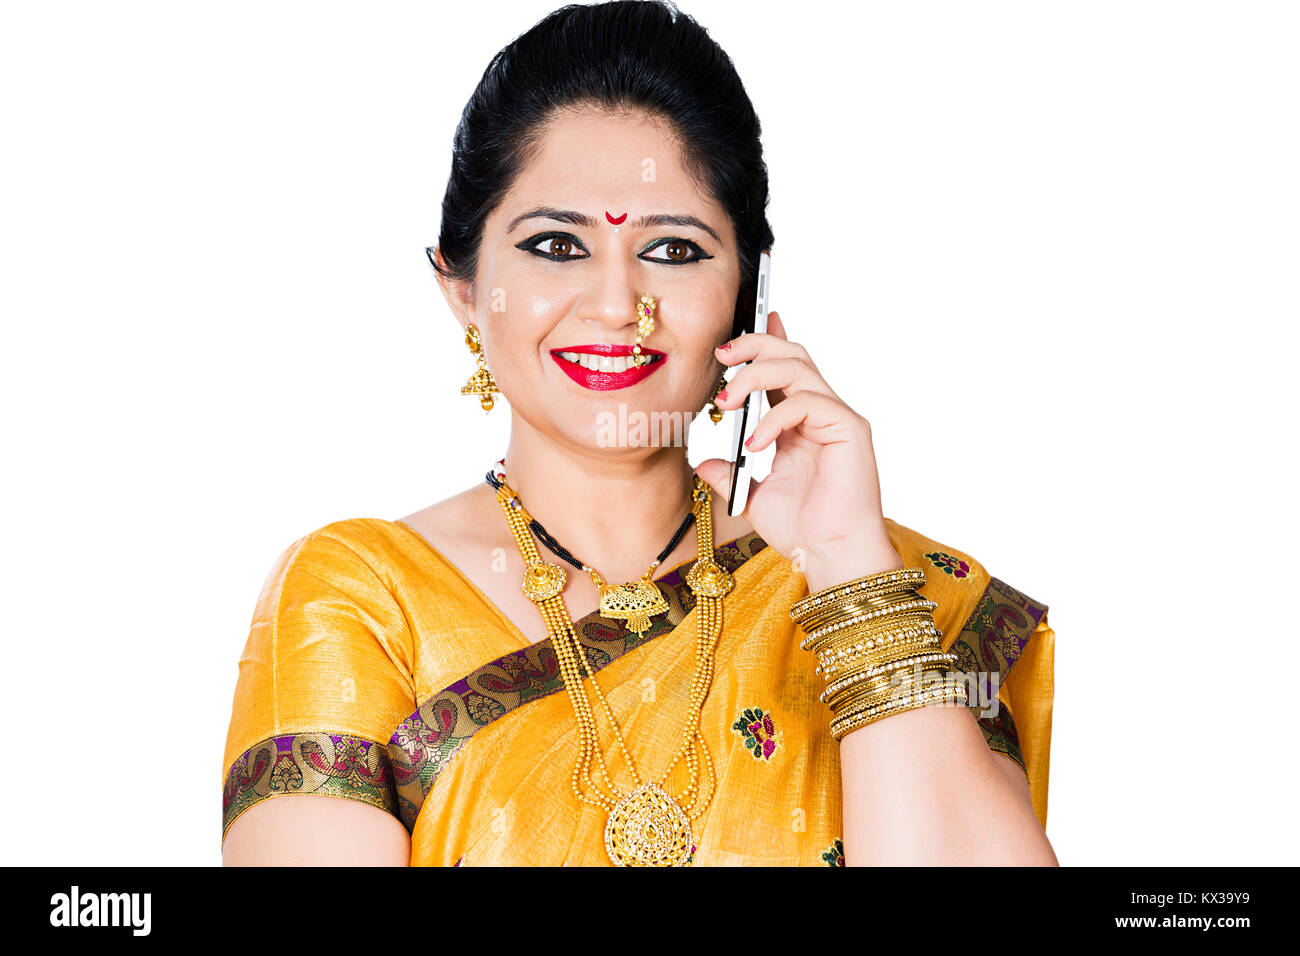 Indian Traditional Marathi Woman Housewife Talking On Mobile Phone Stock Photo